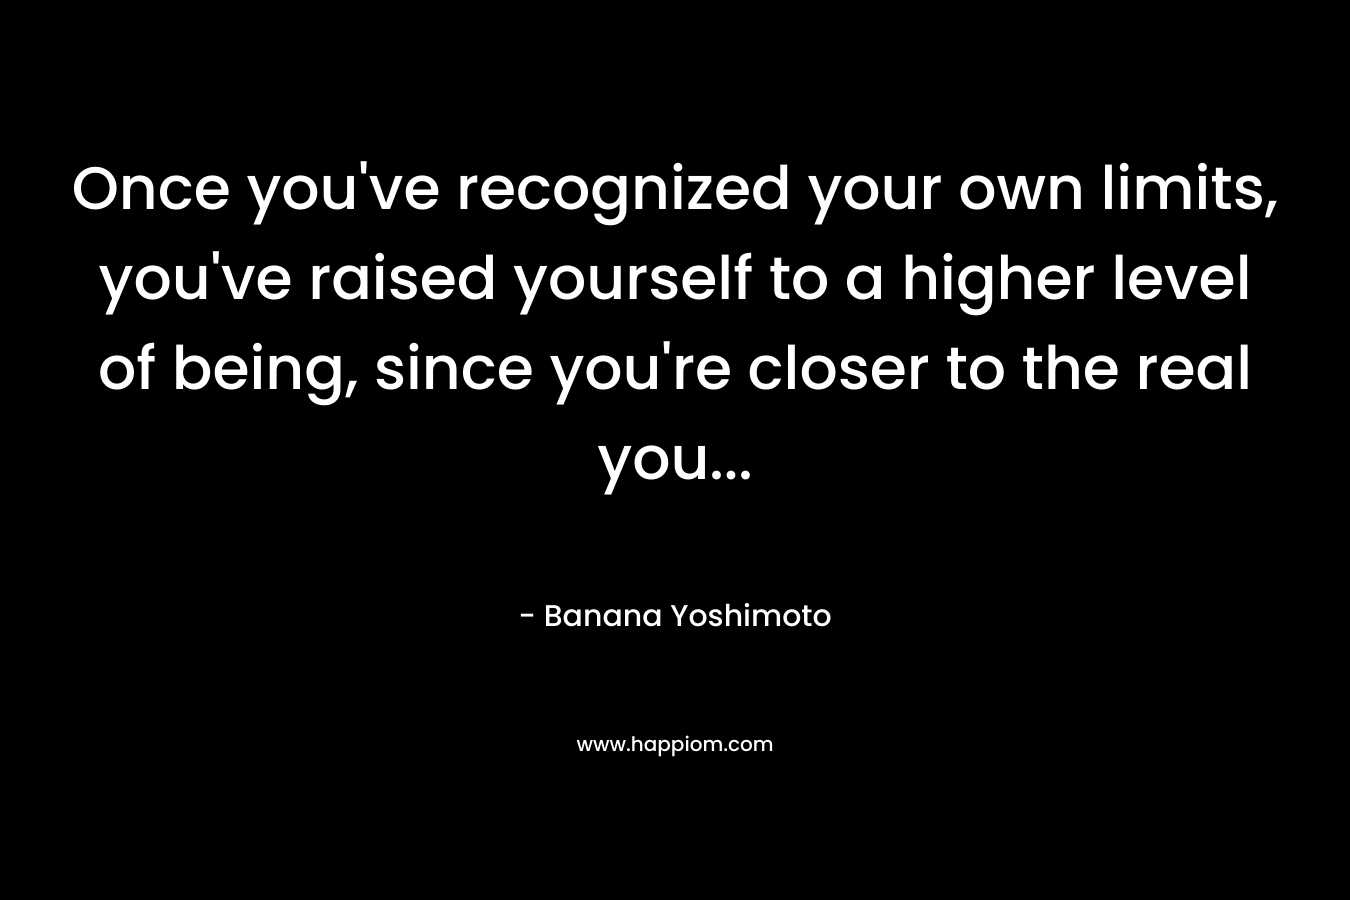 Once you’ve recognized your own limits, you’ve raised yourself to a higher level of being, since you’re closer to the real you… – Banana Yoshimoto